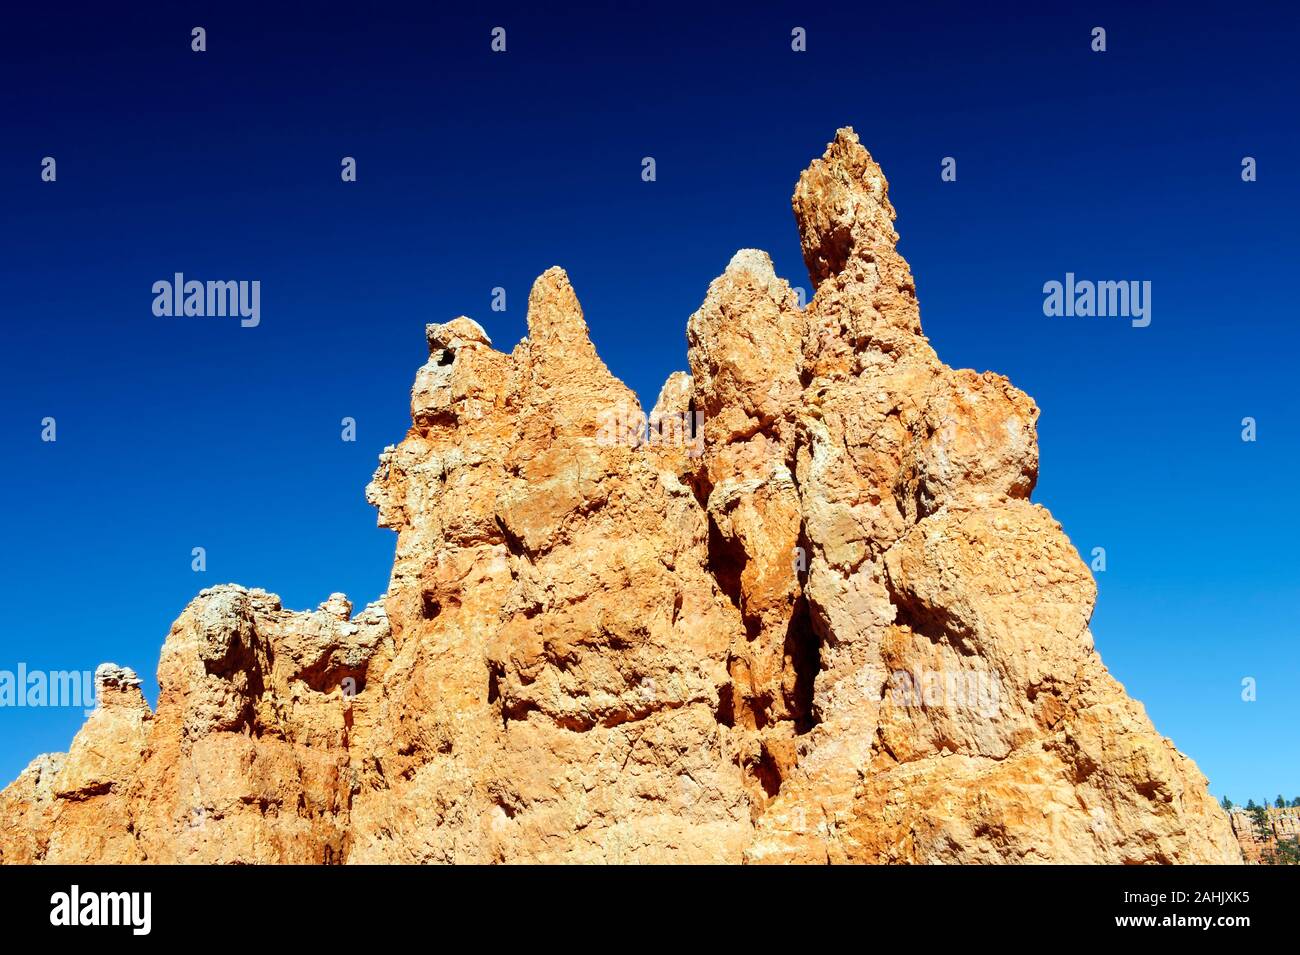 Eroded red rock formations, Bryce Canyon National Park, Utah, USA. Stock Photo